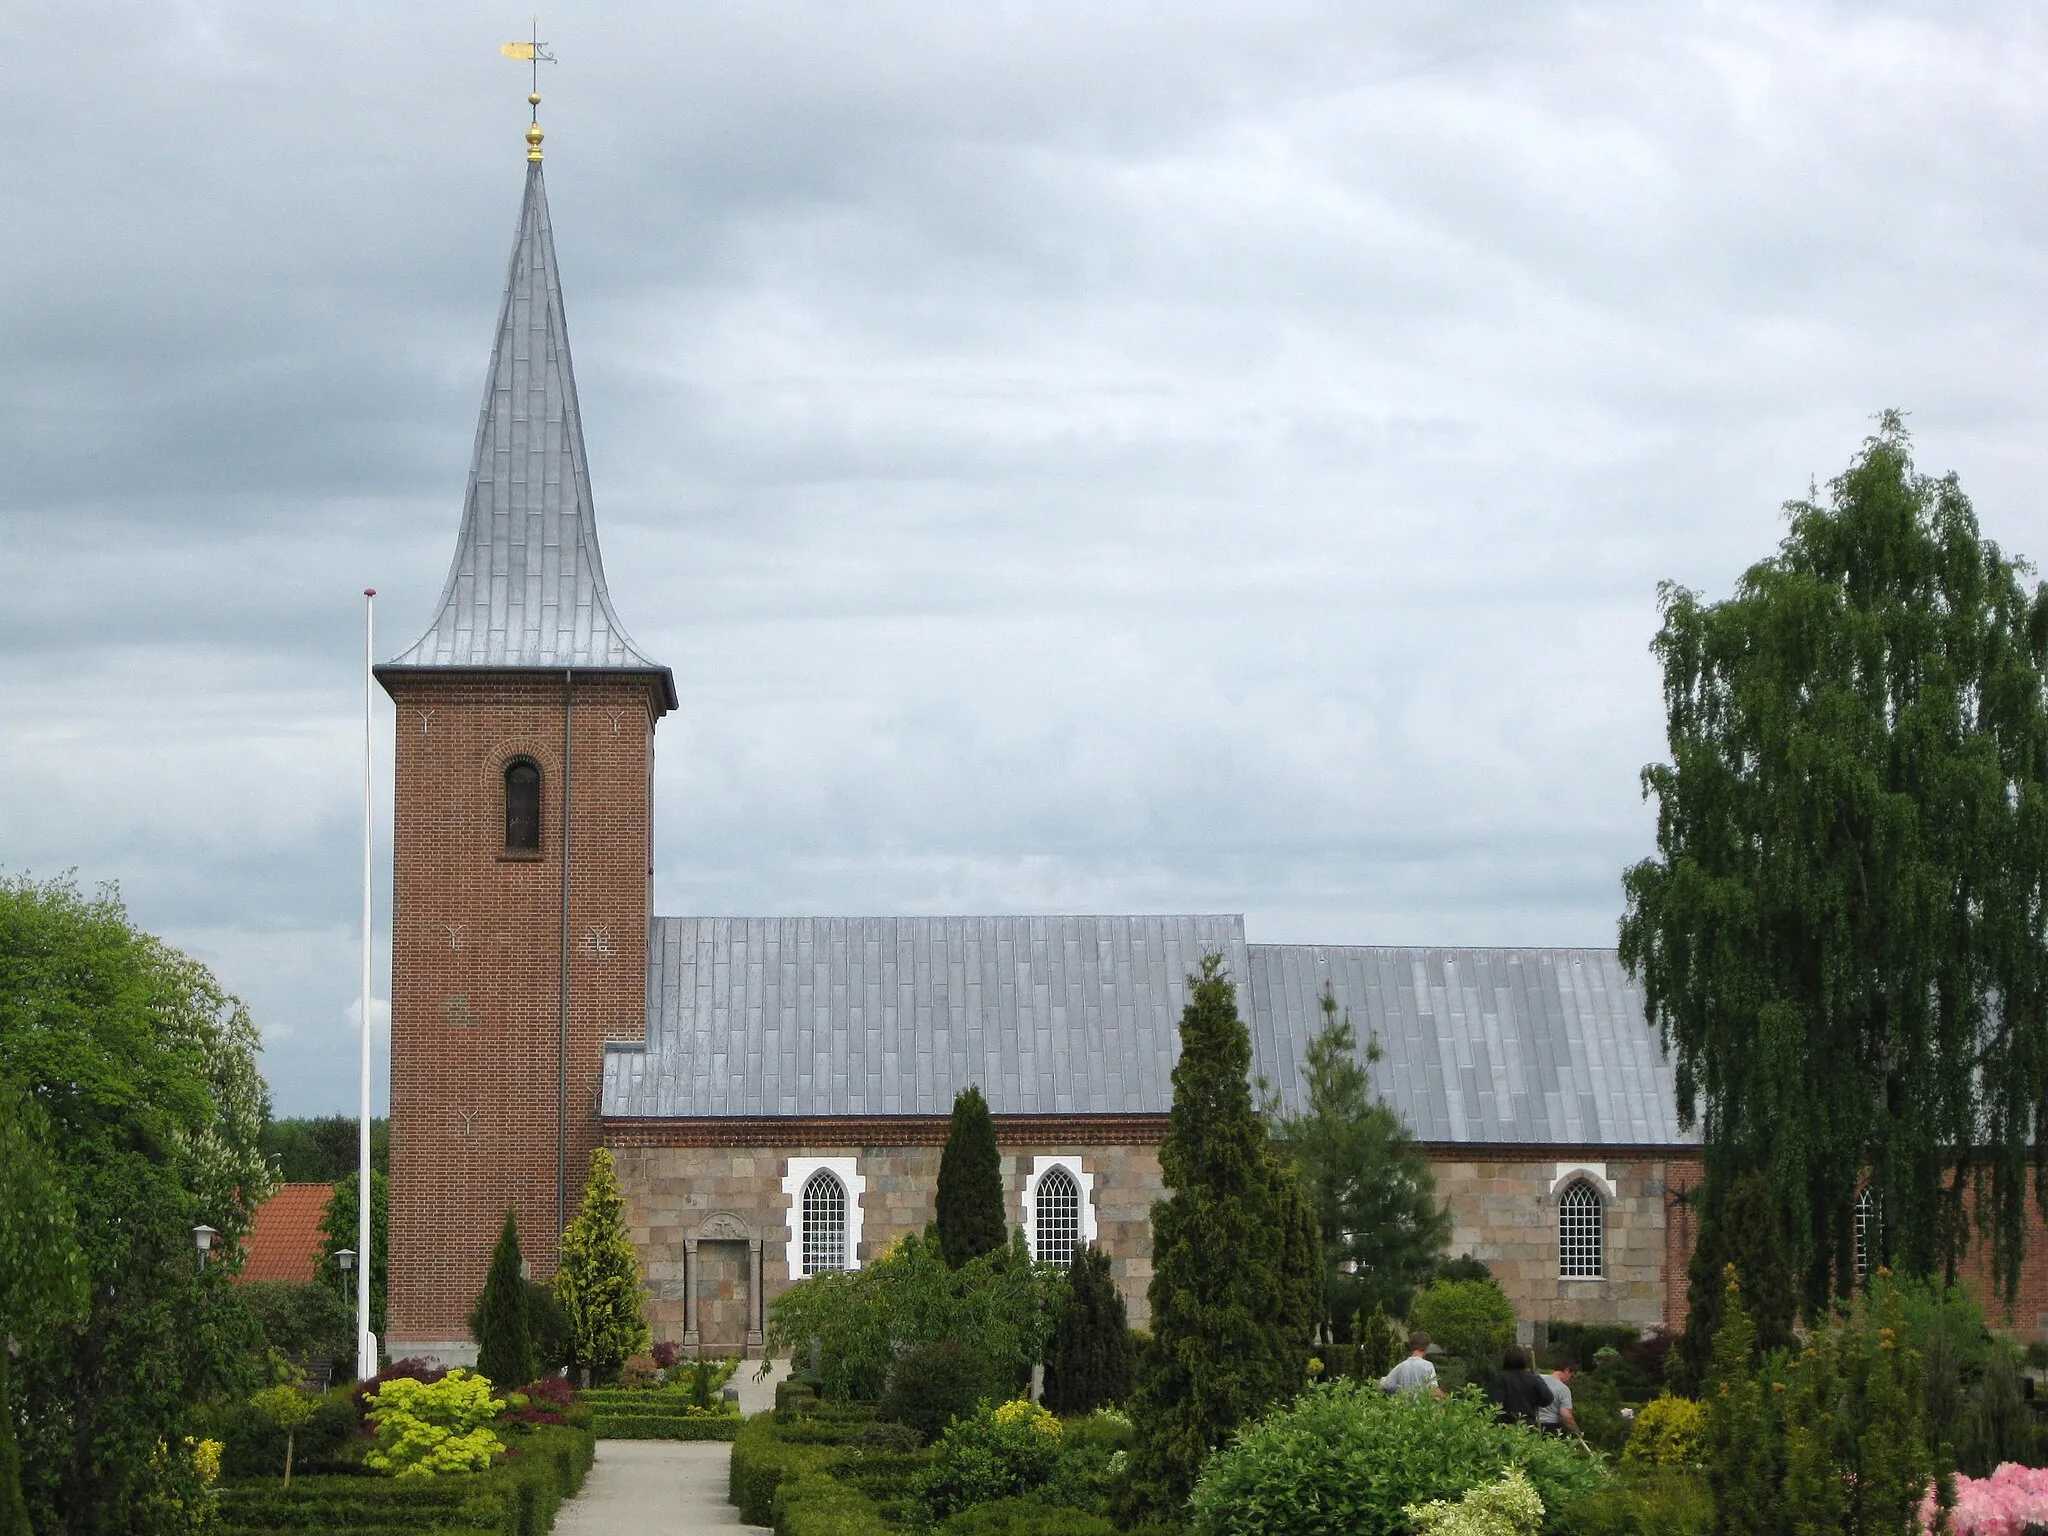 Photo showing: The church "Hammel Kirke" in the small town "Hammel". The town is located in East Jutland, Denmark.